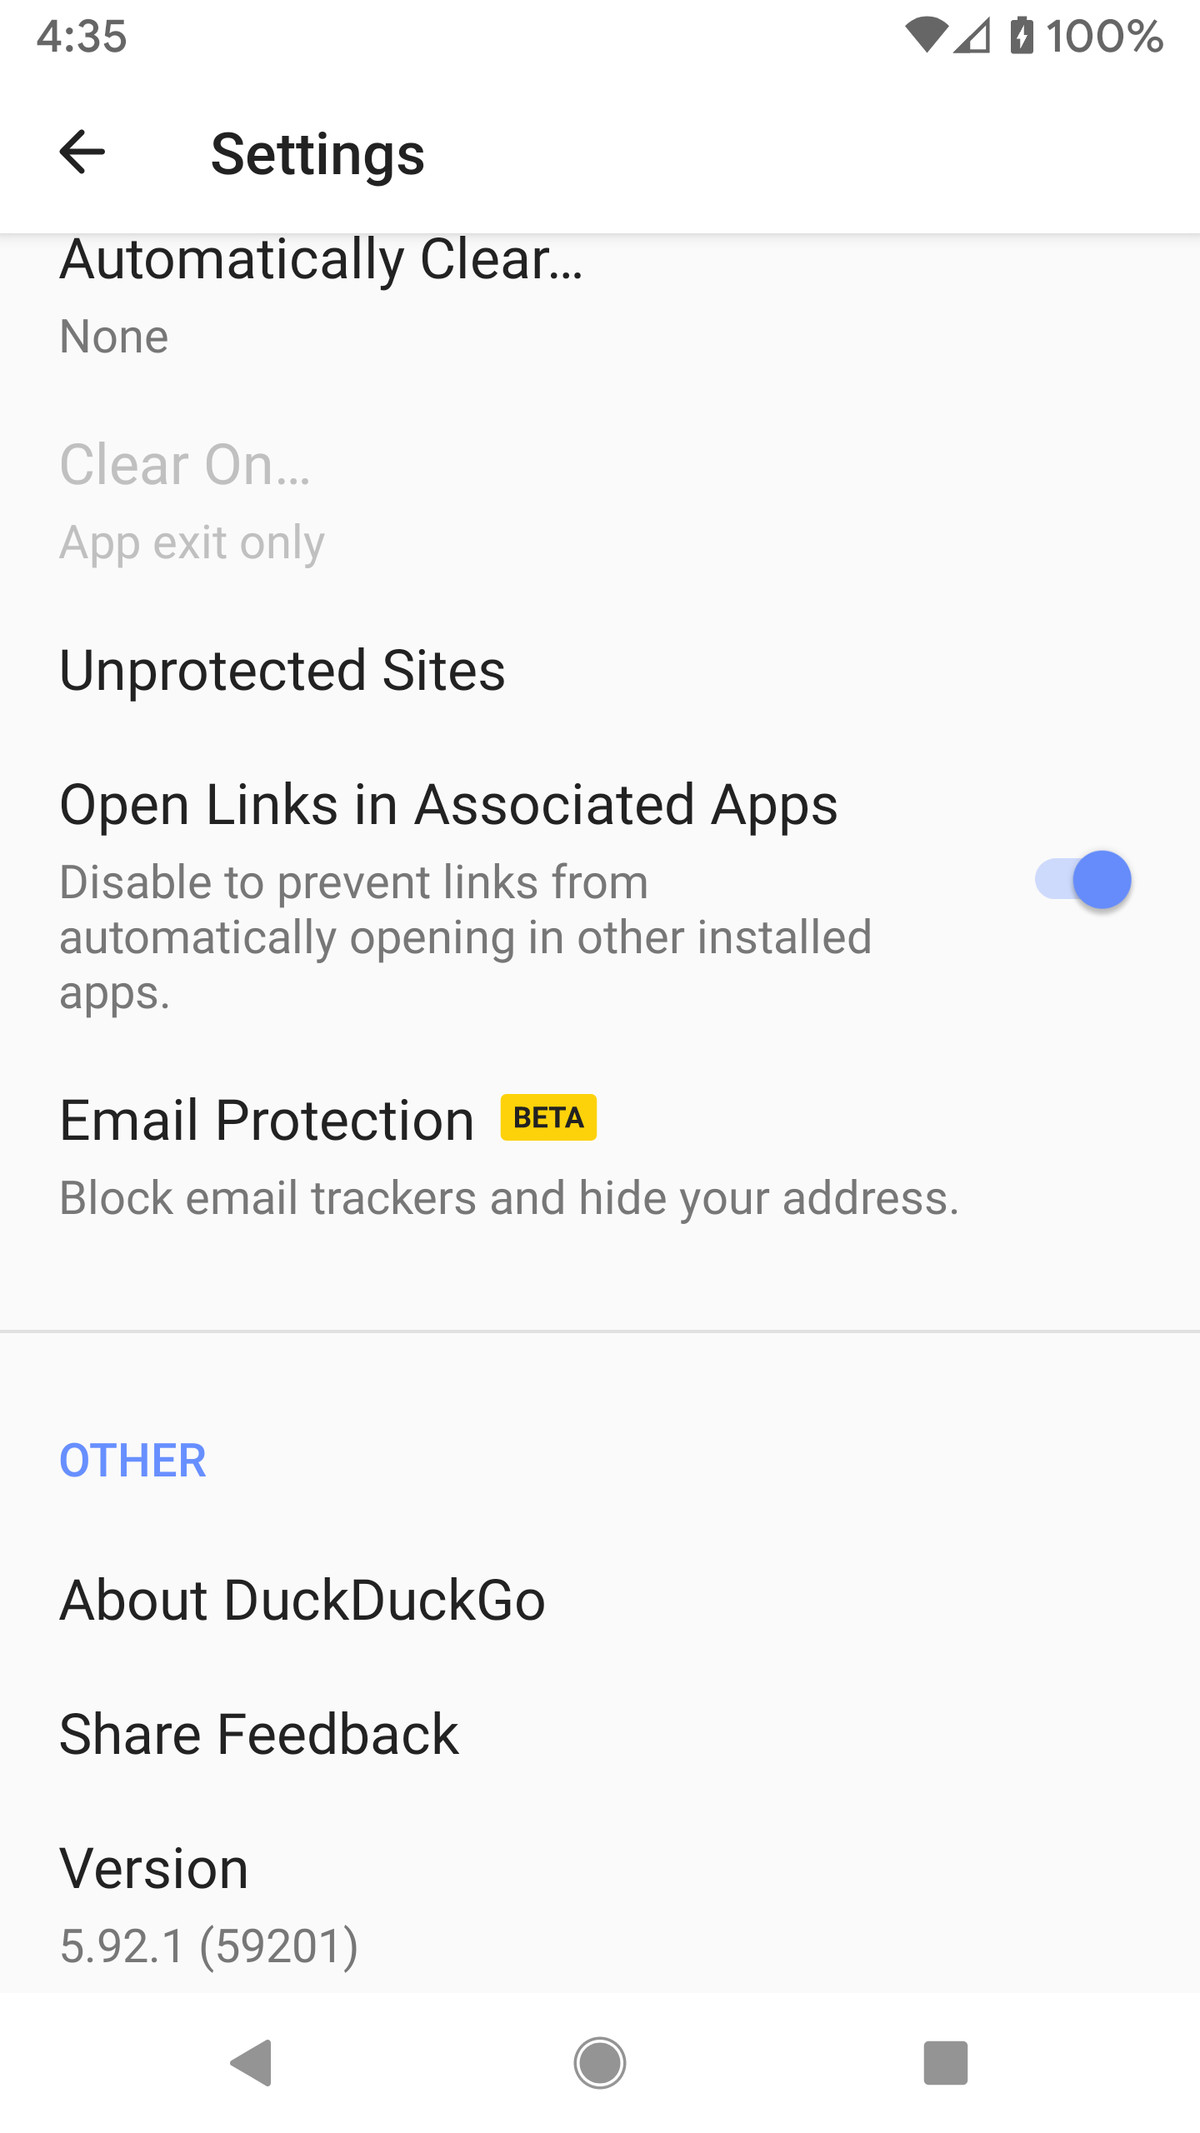 Find “Email Protection” in the mobile app’s settings.